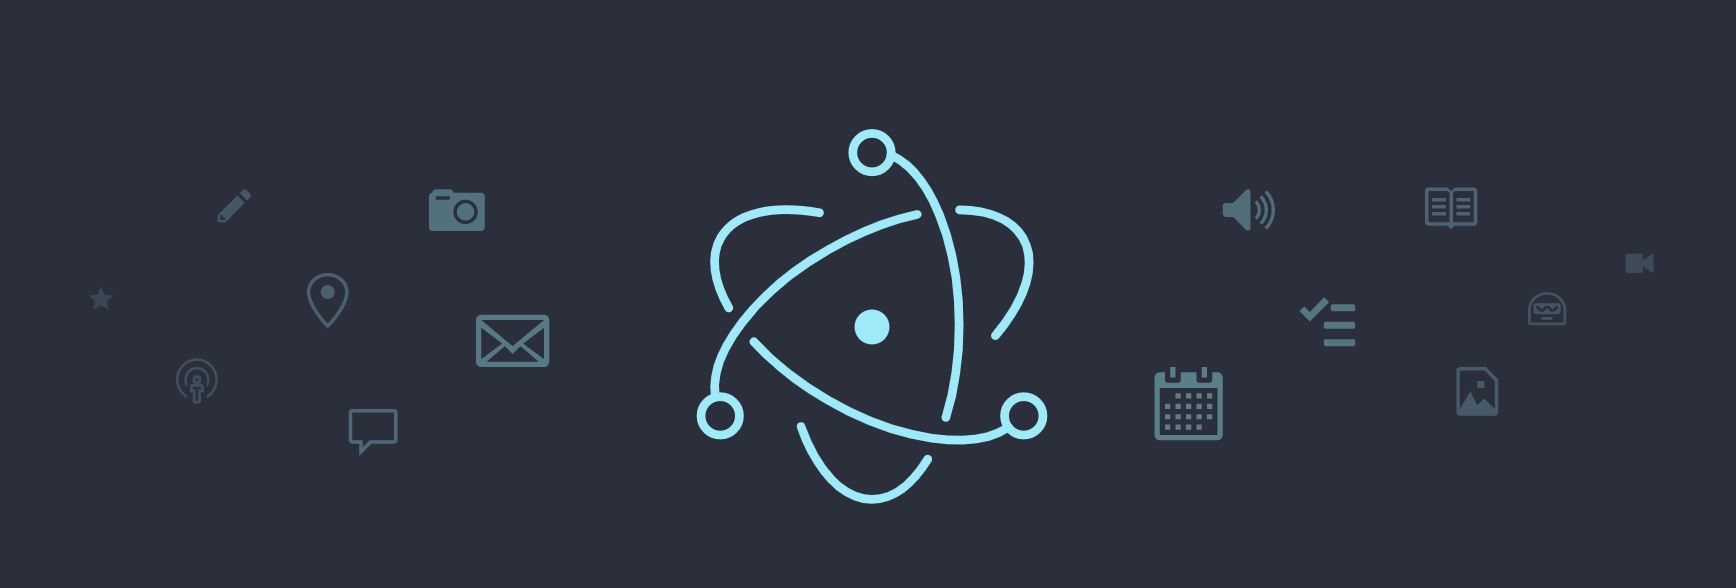 What is Electron?